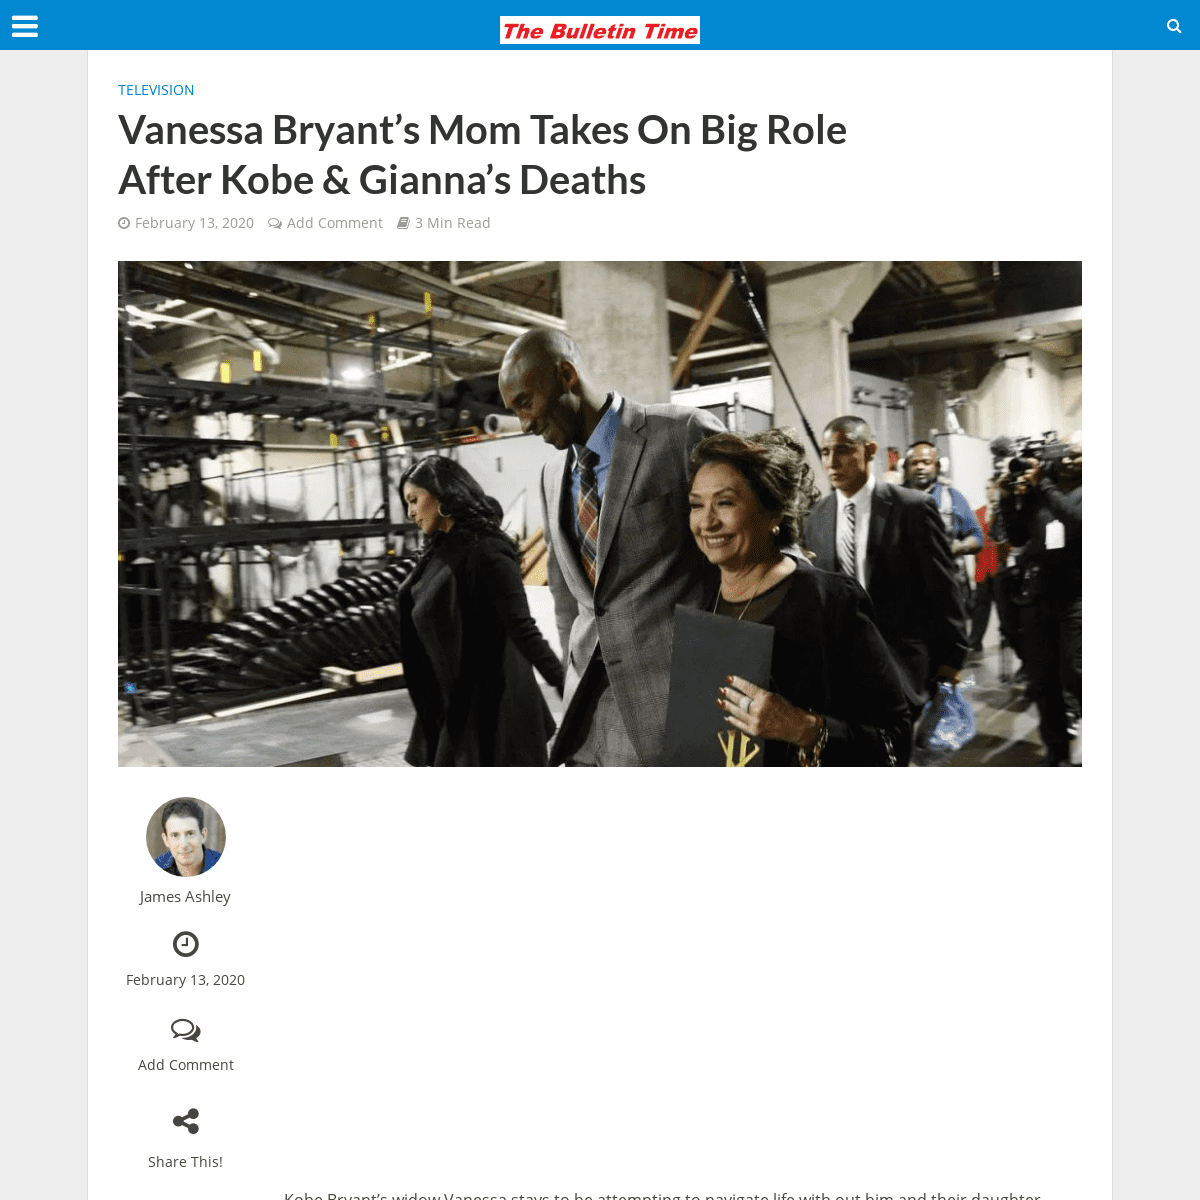 A complete backup of www.thebulletintime.com/television/vanessa-bryants-mom-takes-on-big-role-after-kobe-giannas-deaths/